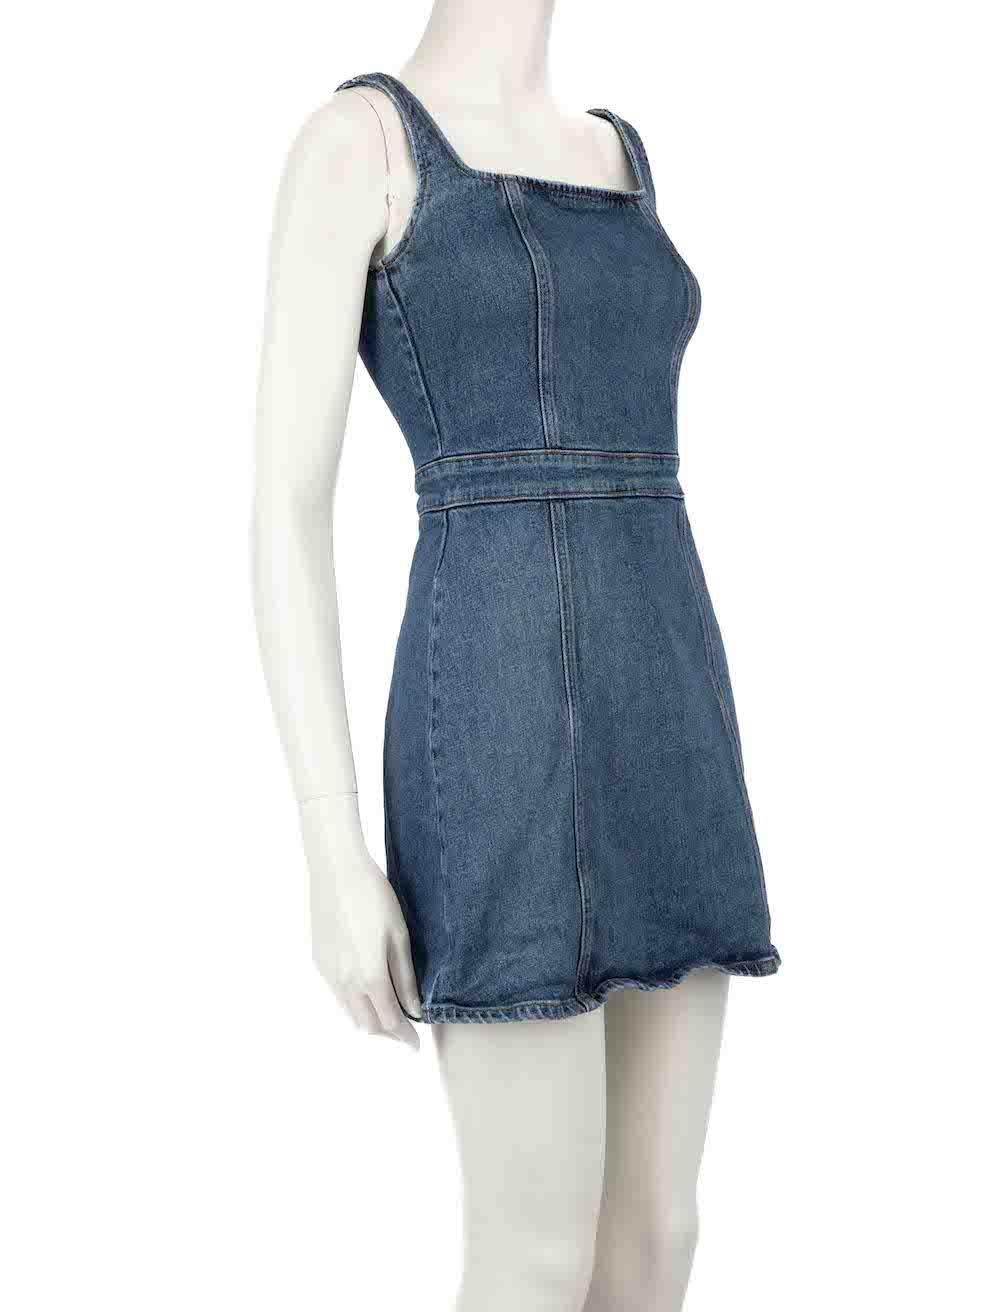 CONDITION is Good. Minor wear to dress is evident. Light wear to the neckline and underarms with plucks to the denim trim on this used Reformation designer resale item.
 
Details
Parker model
Blue
Denim
Mini dress
Square neckline
Back zip closure
